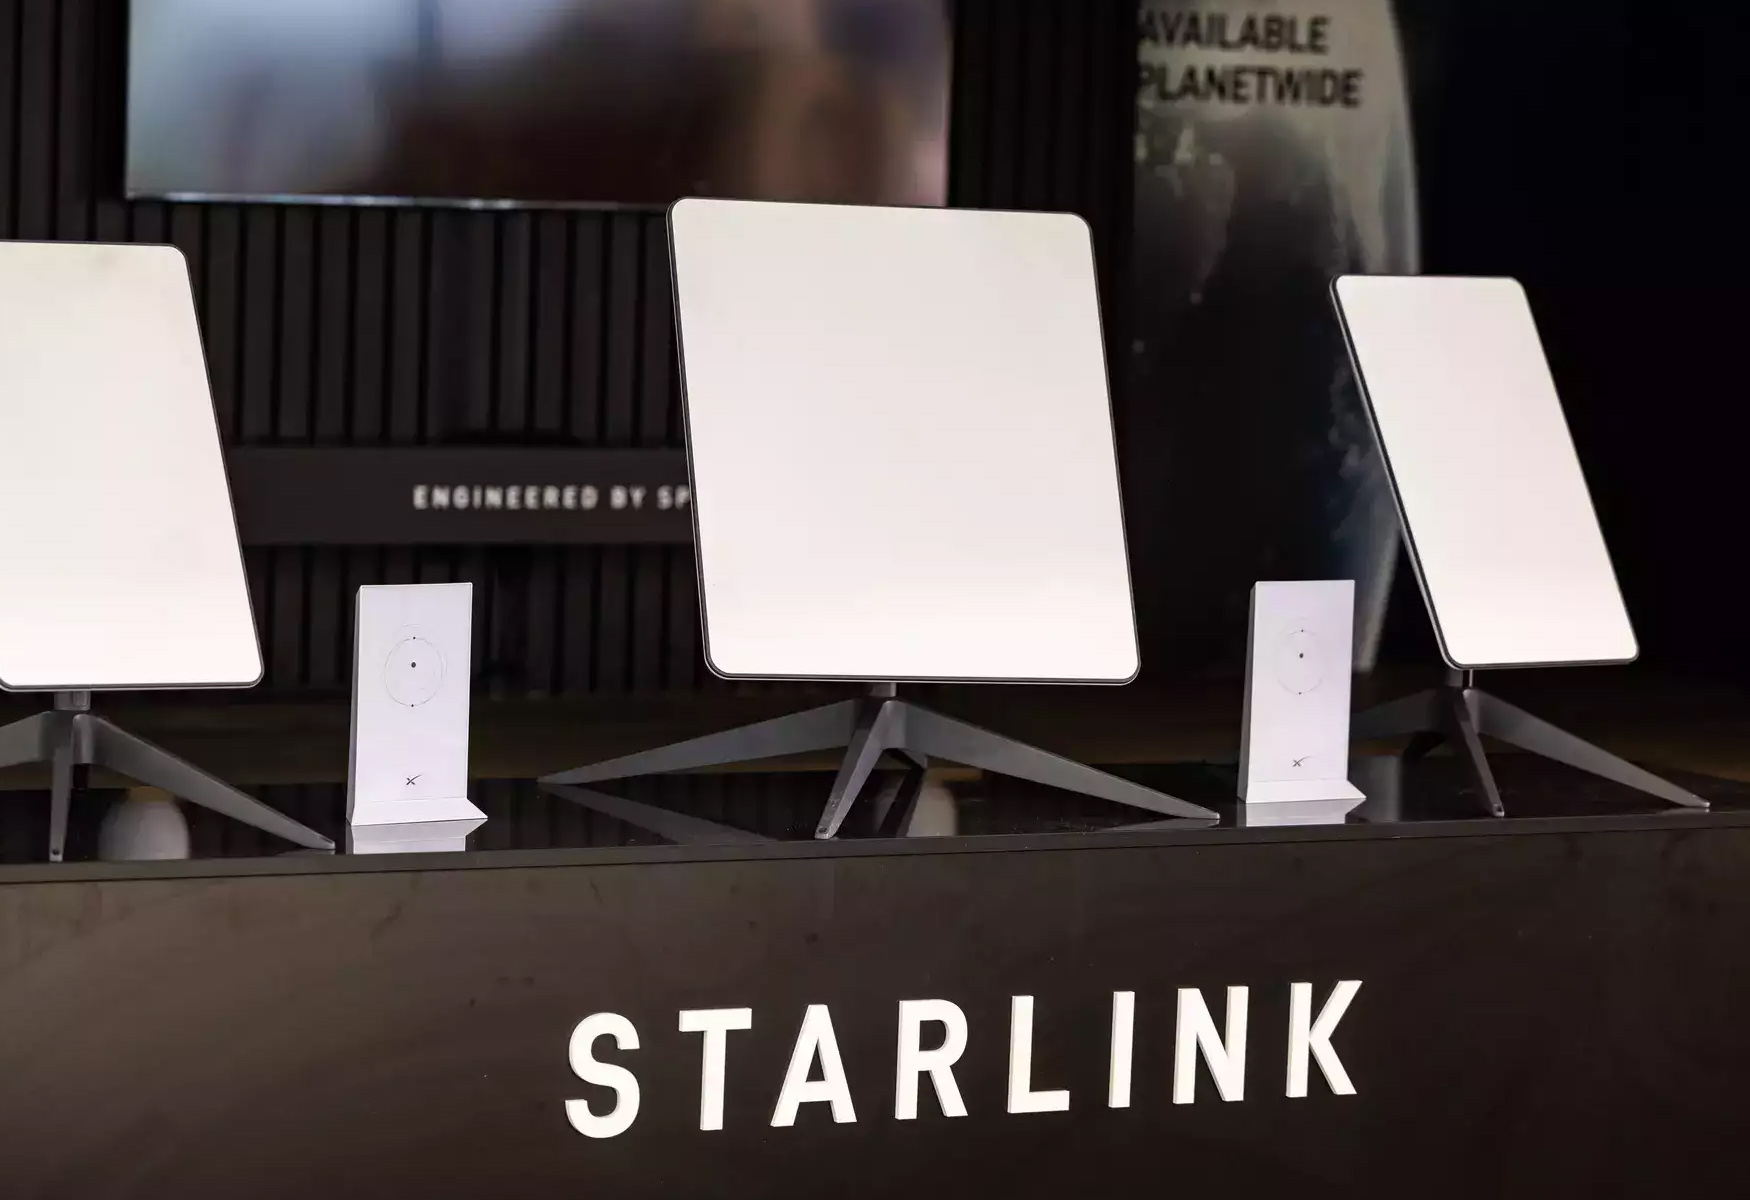 India’s New Telecom Law Sets Stage For Starlink Amid Privacy Concerns